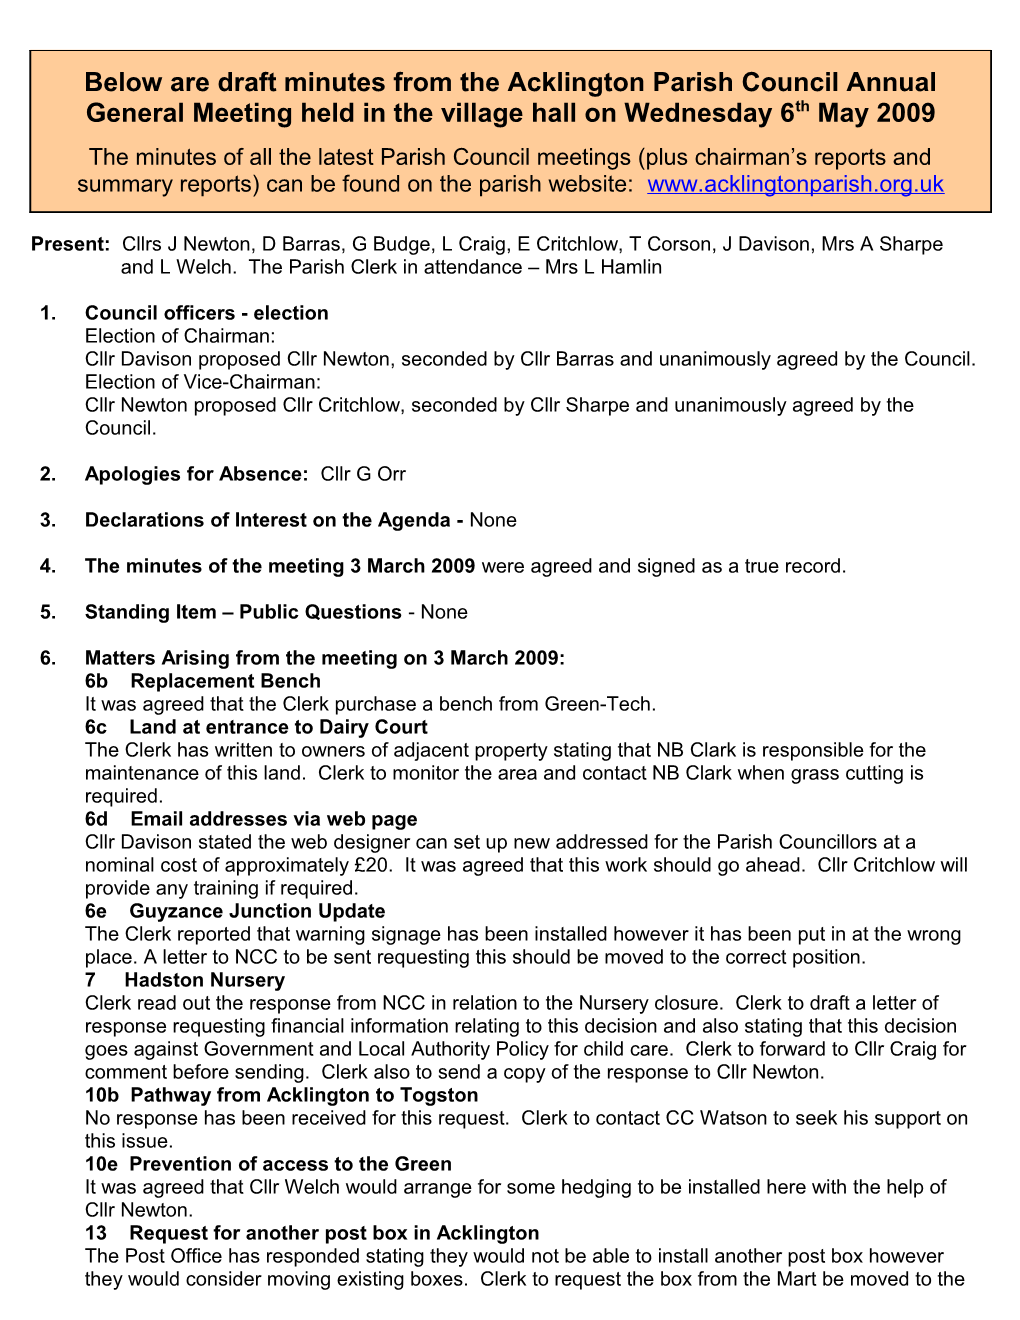 Below Are Draft Minutes from the Acklington Parish Council Meeting Held in the Village